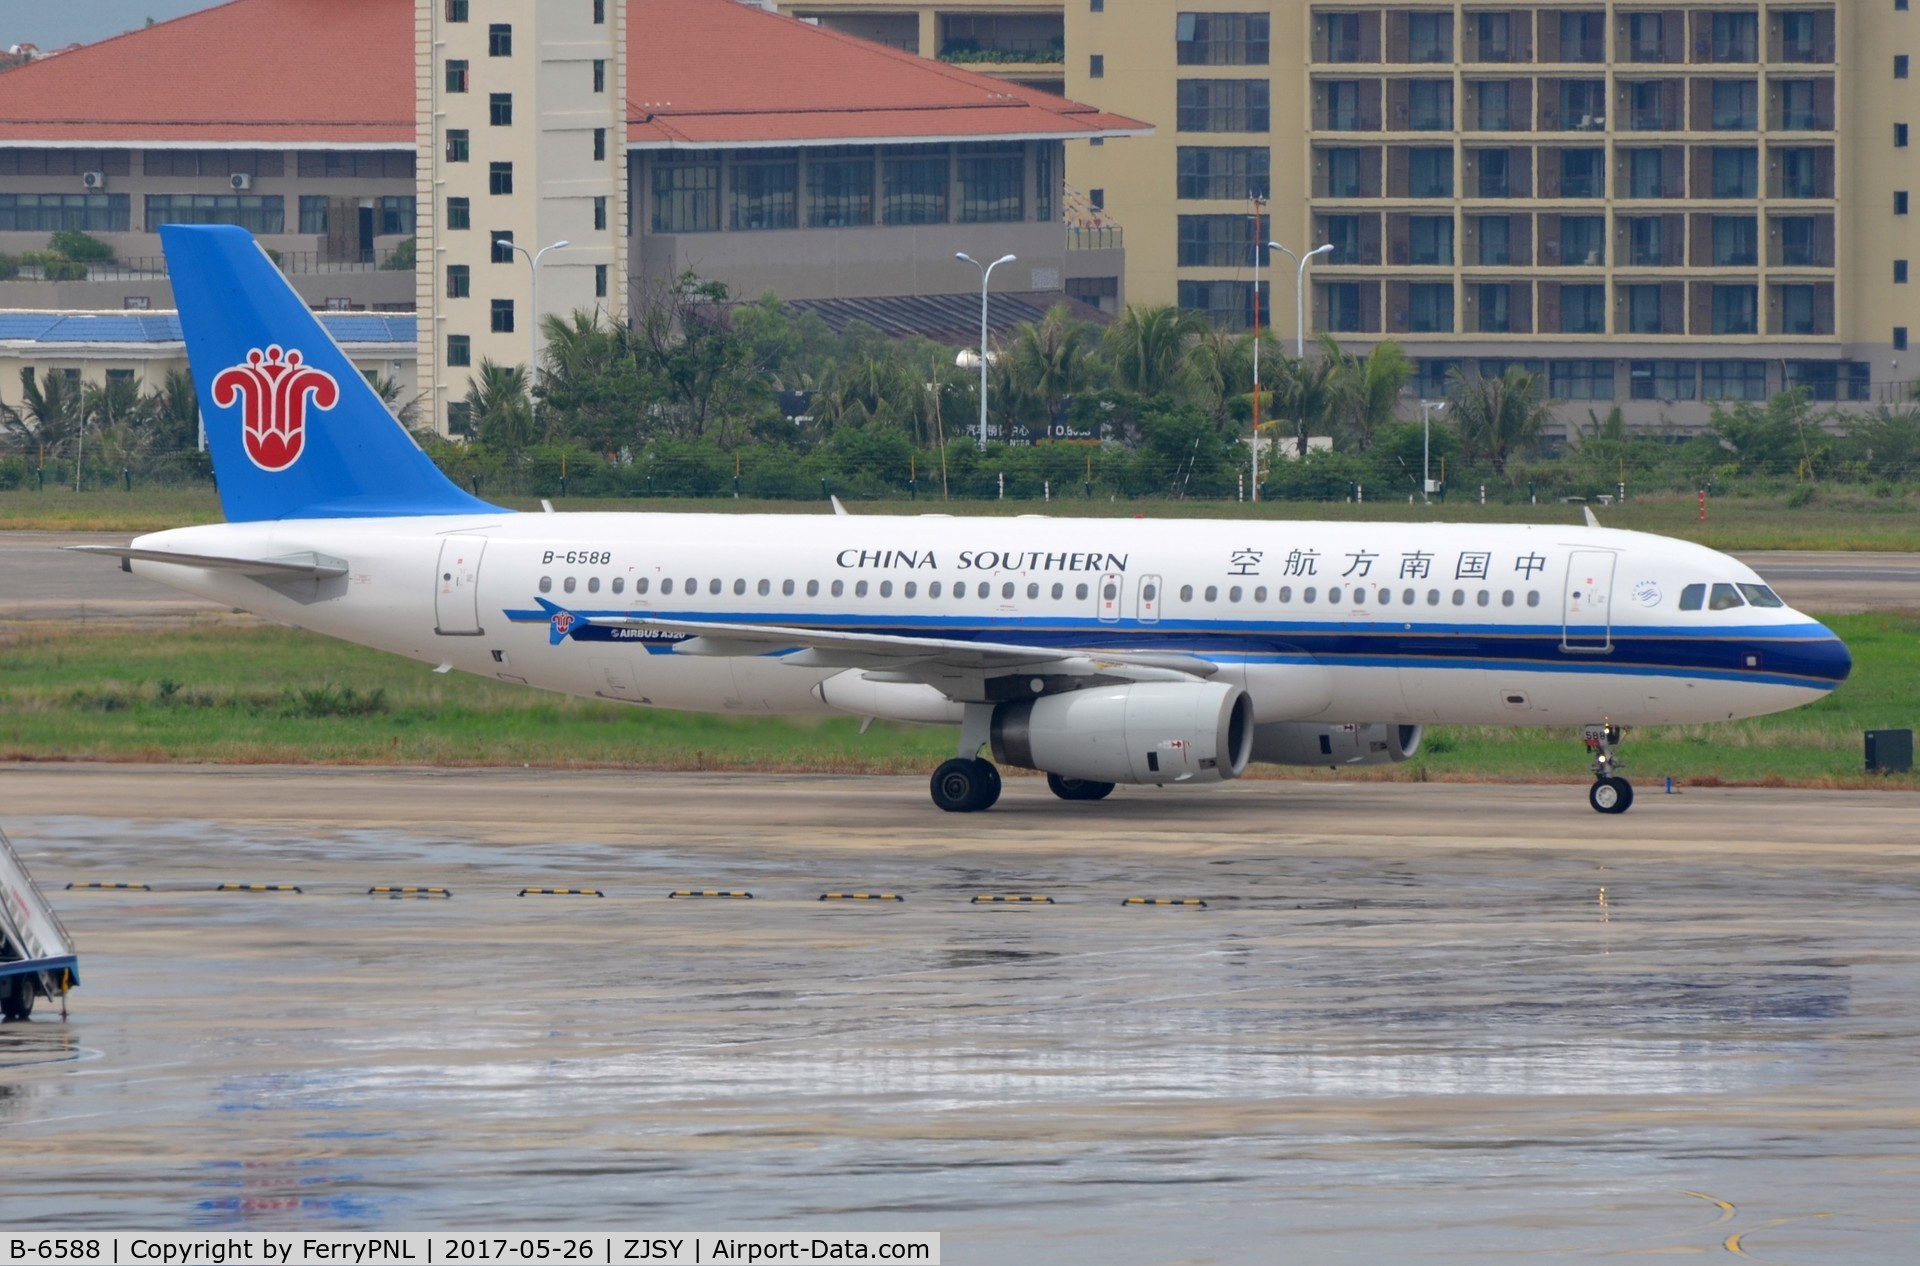 B-6588, 2009 Airbus A320-232 C/N 4017, China Southern A320 taxying in.